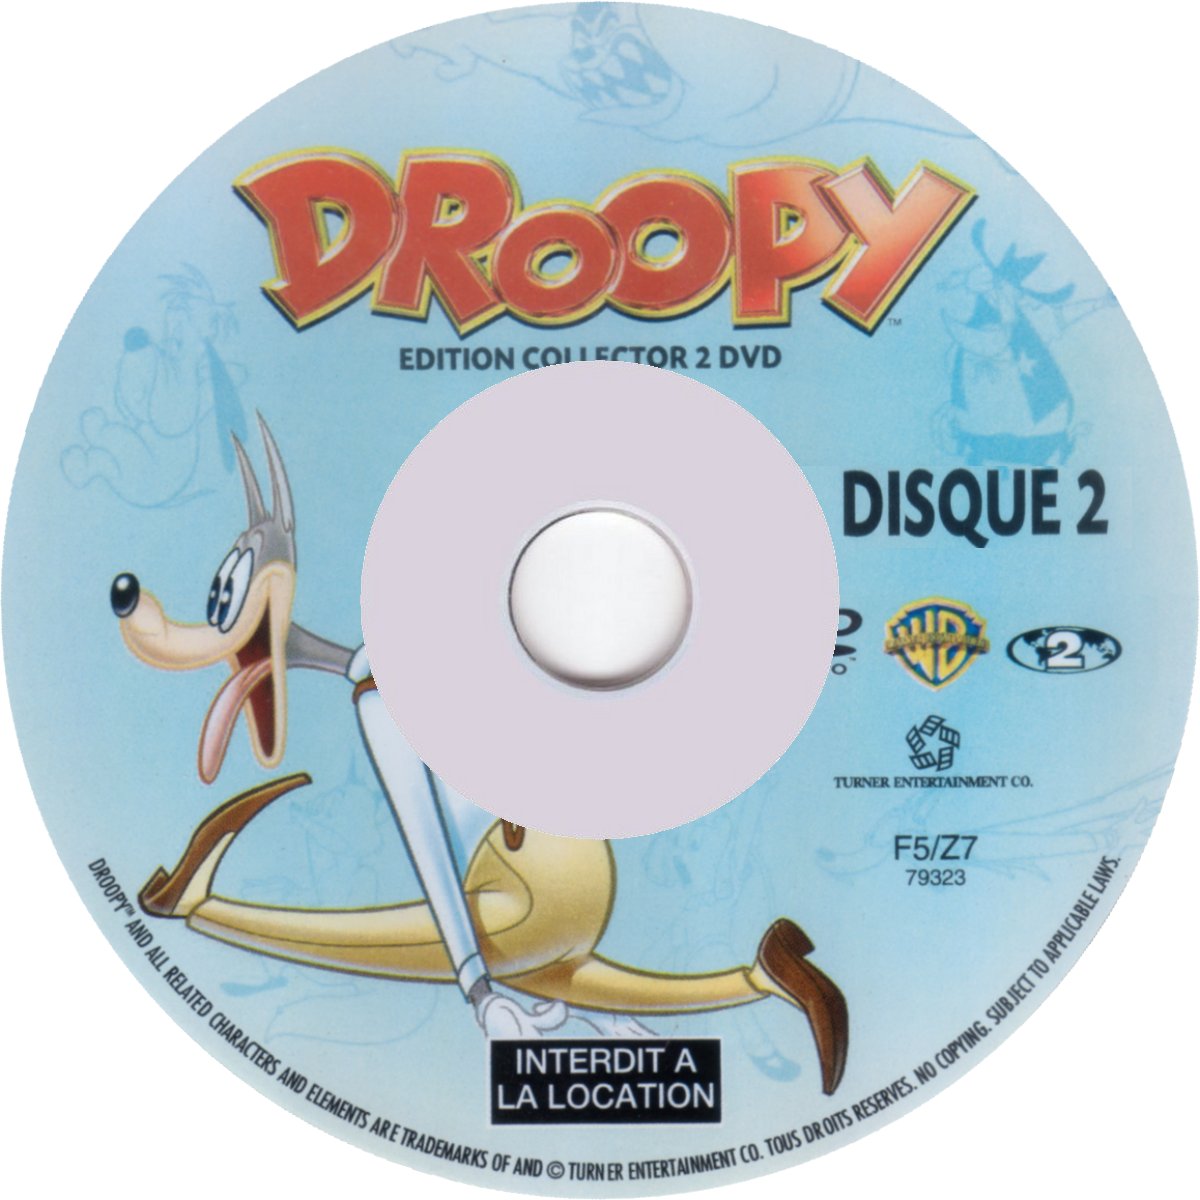 Droopy Dvd